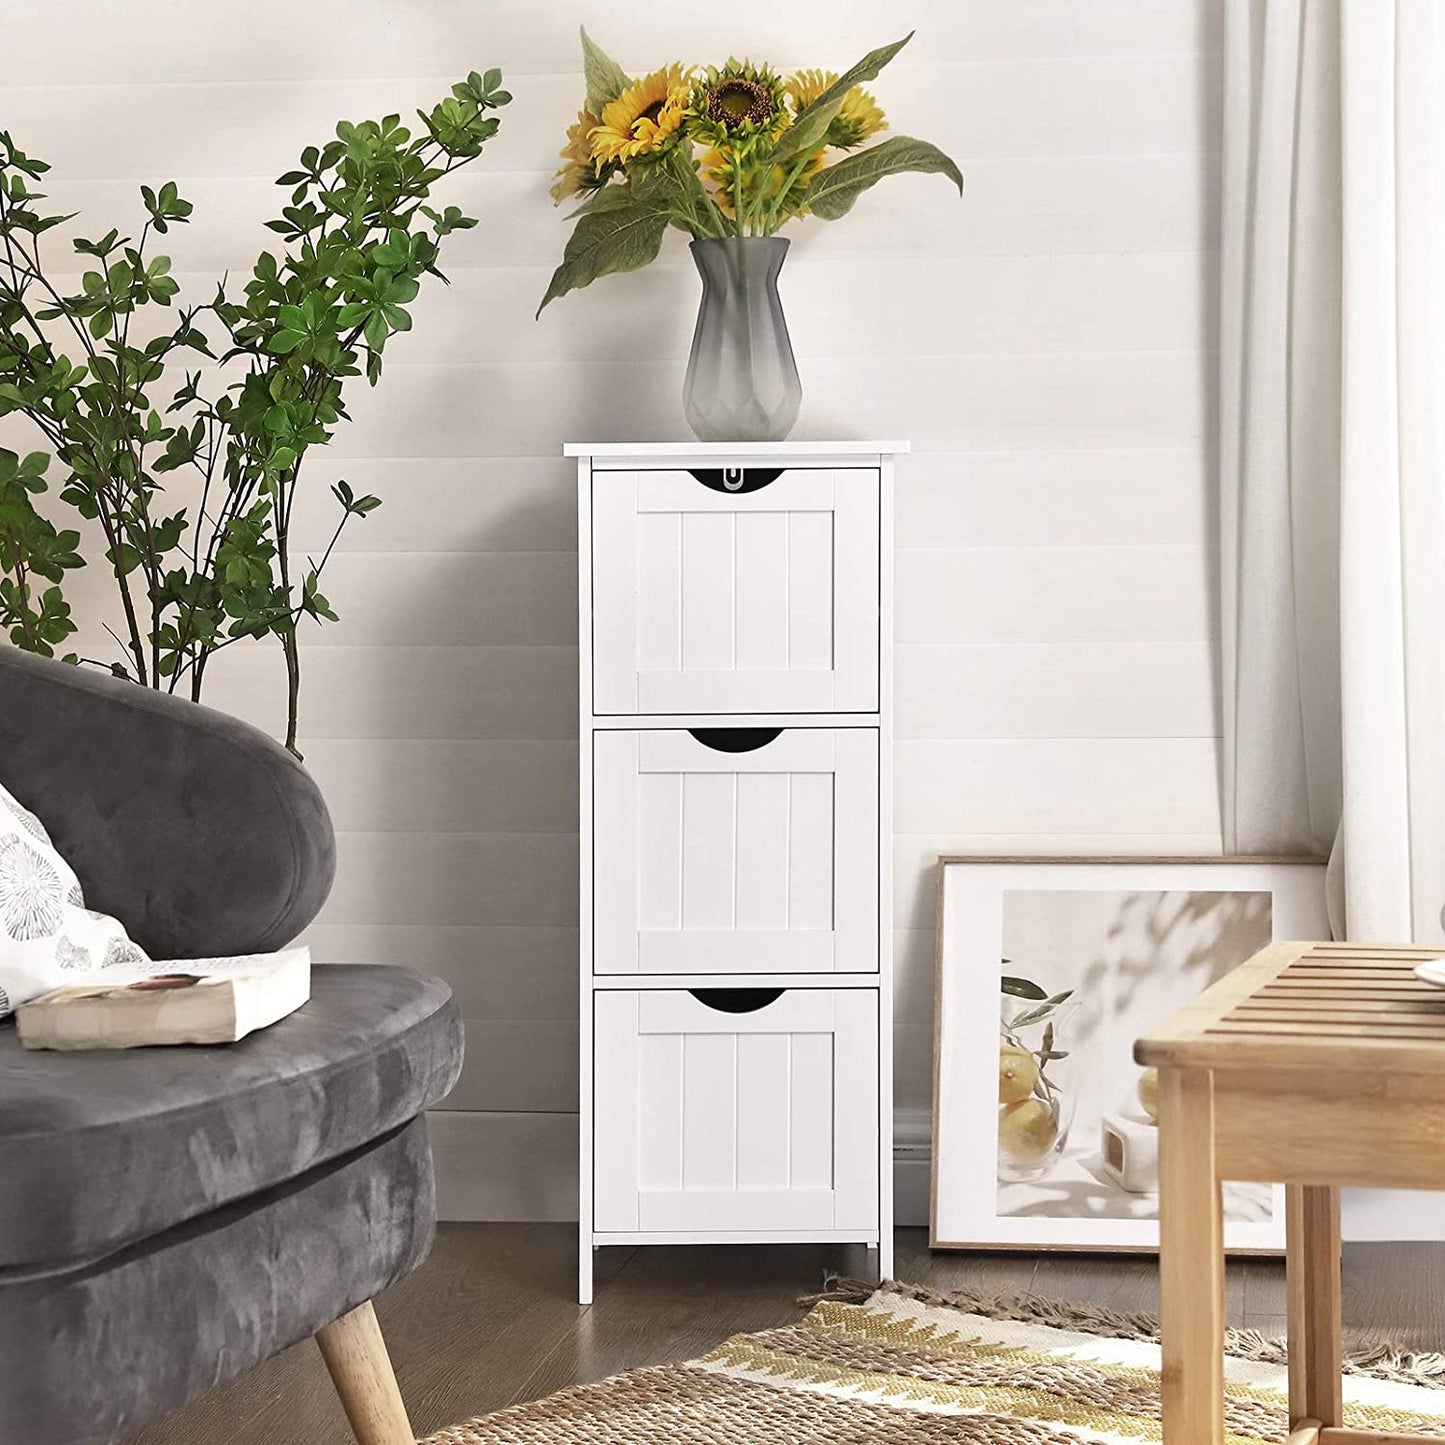 Nancy's Camden Storage Cabinet - Bathroom Cabinet - Chest of Drawers - 3 Drawers - White - Standing Cabinet - MDF - 32 x 30 x 81 cm